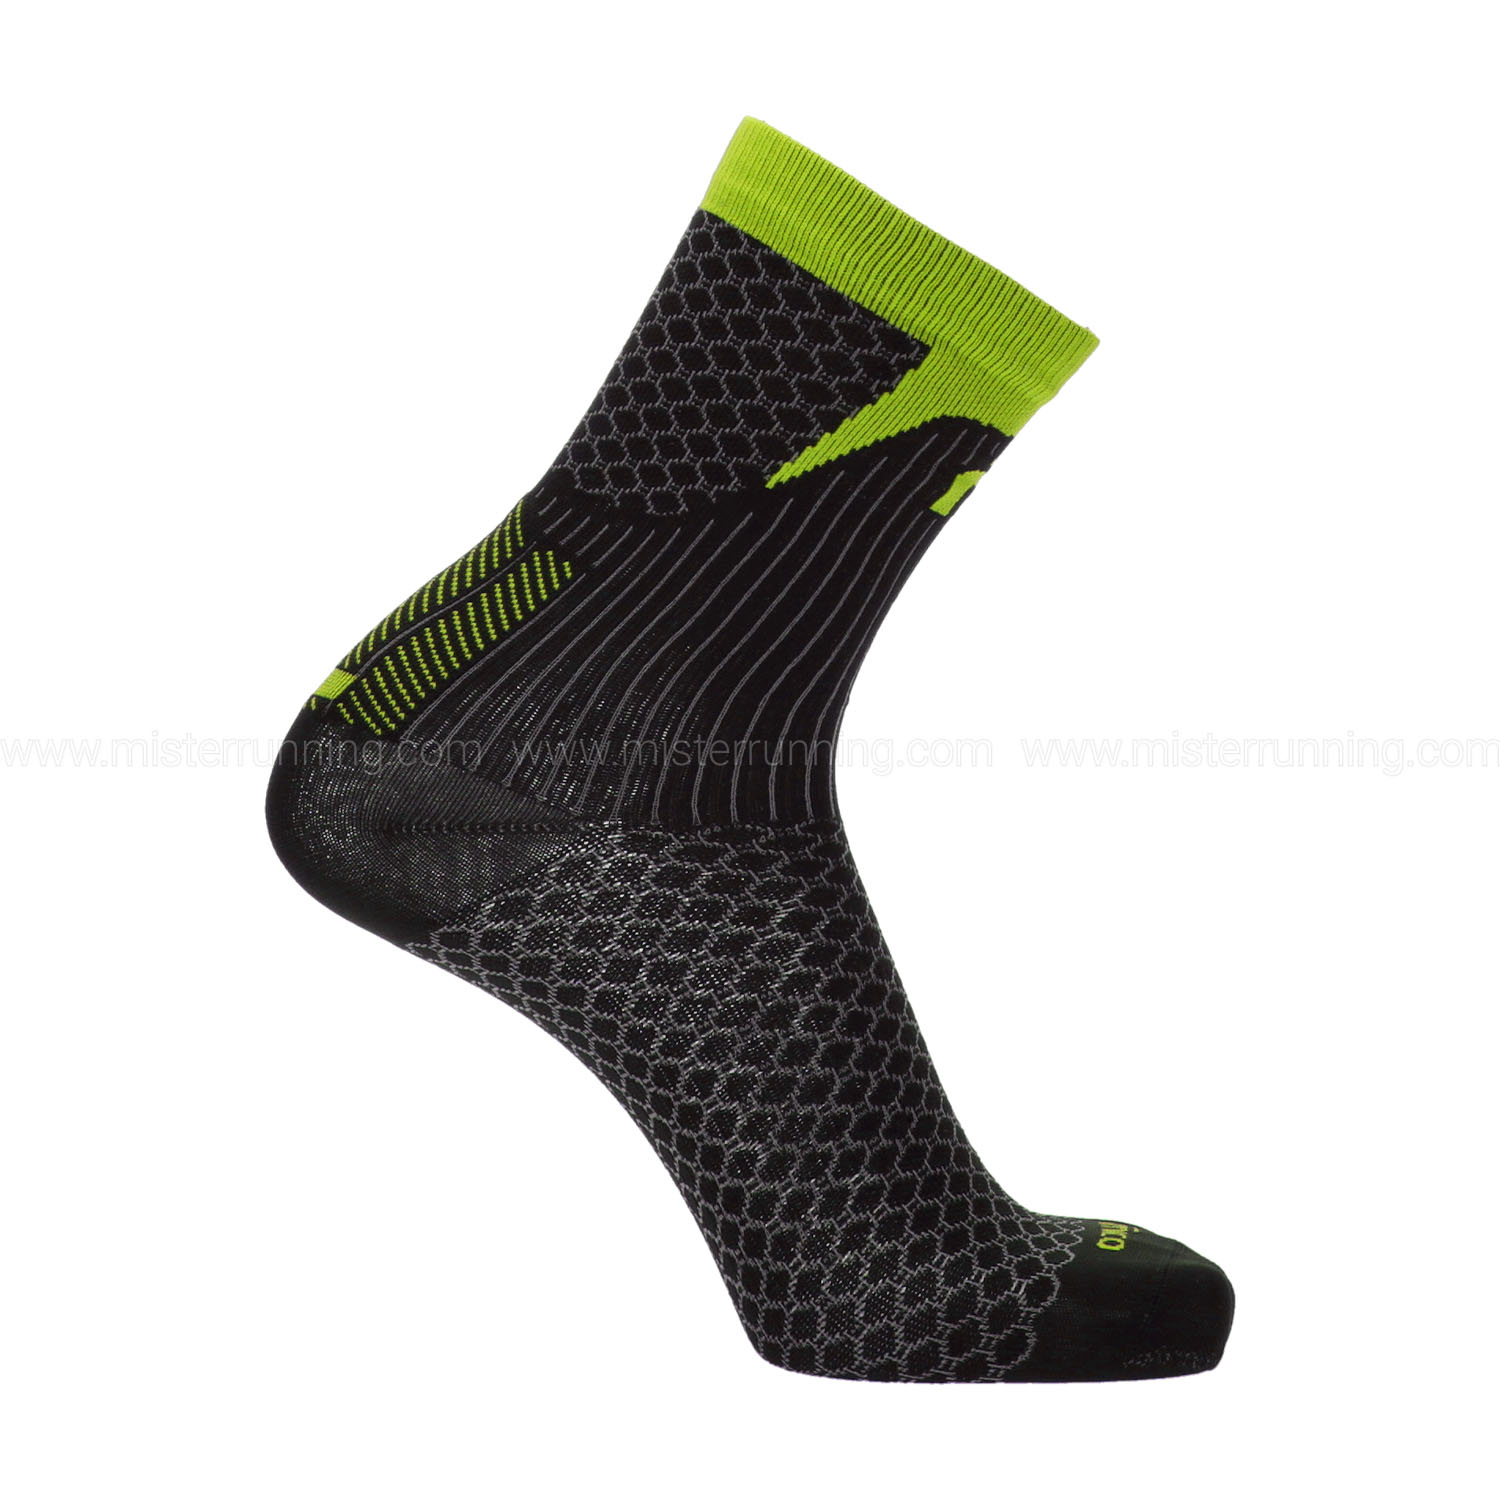 Mico Performance Light Weight Calze - Nero/Giallo Fluo